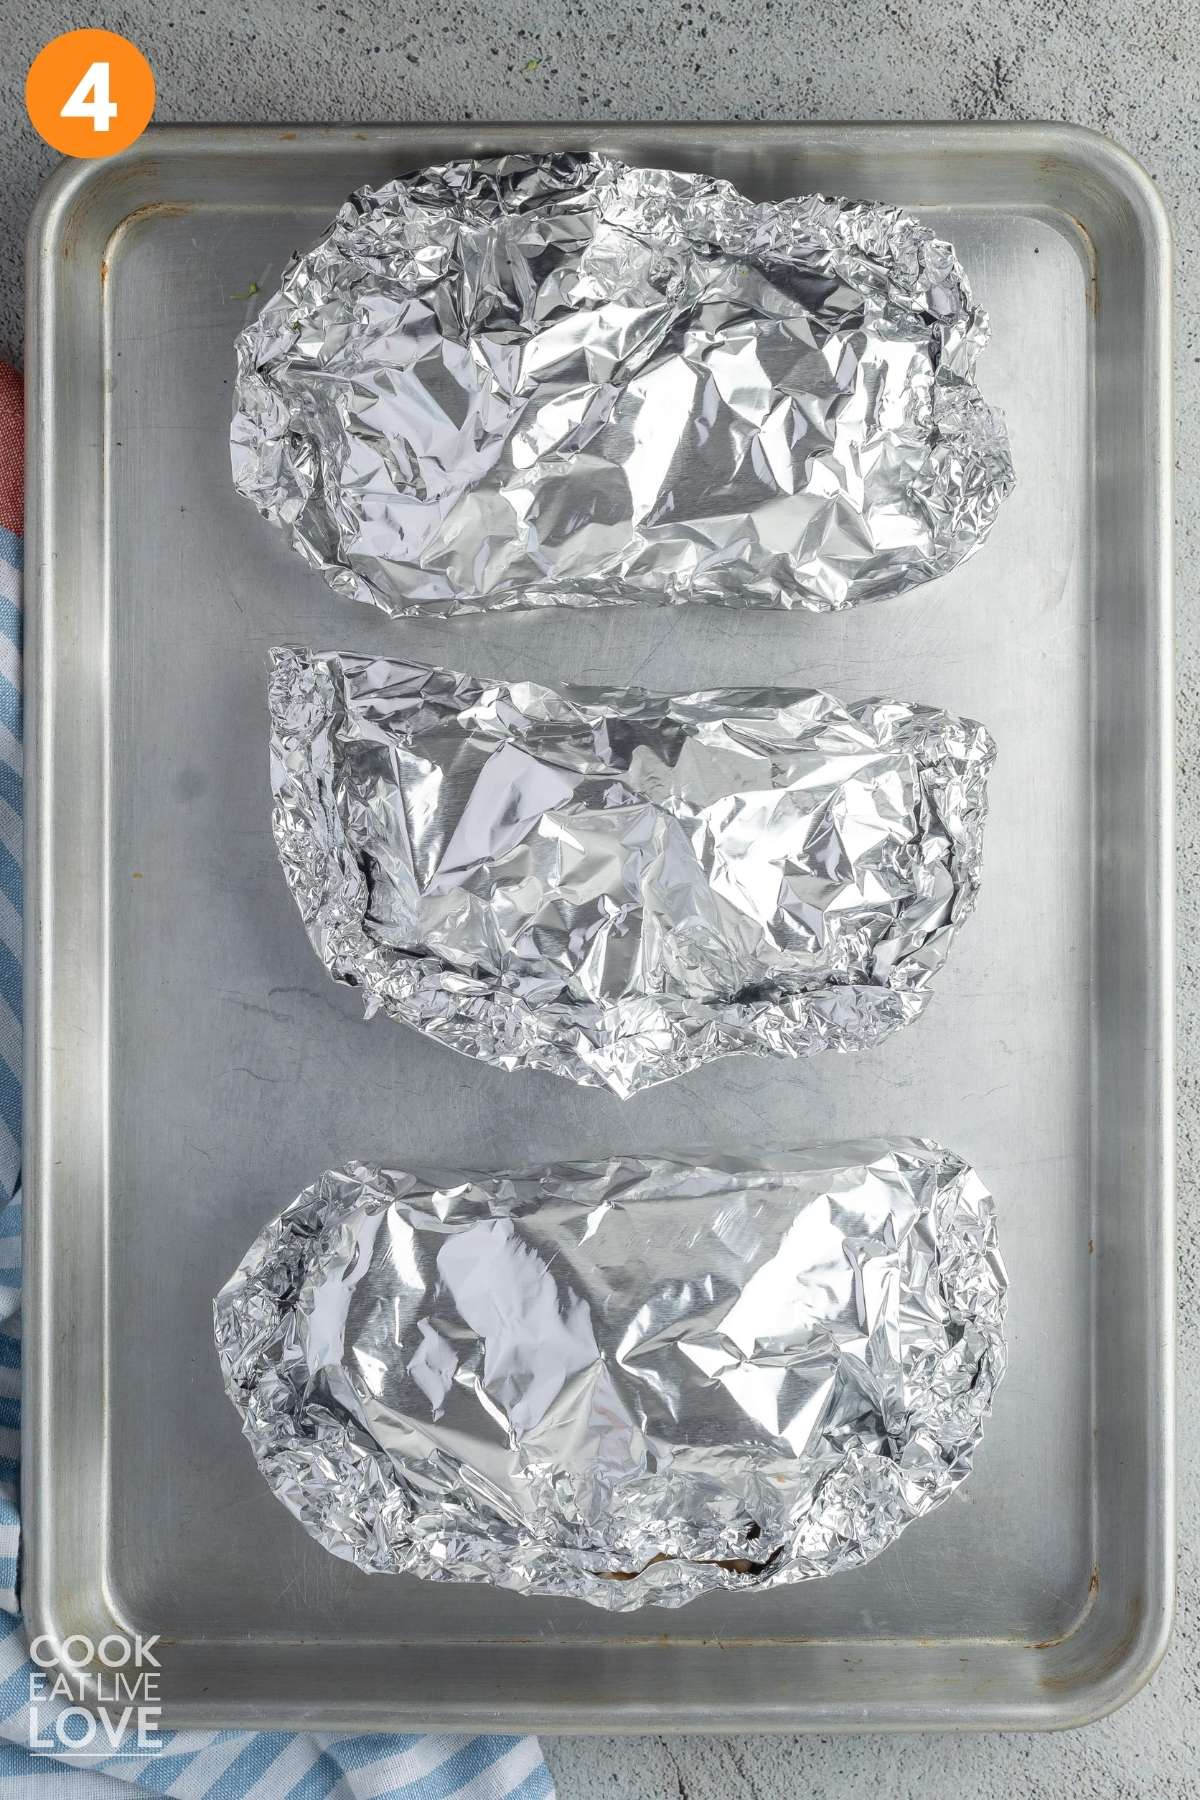 Three vegetable foil packs on a baking pan.